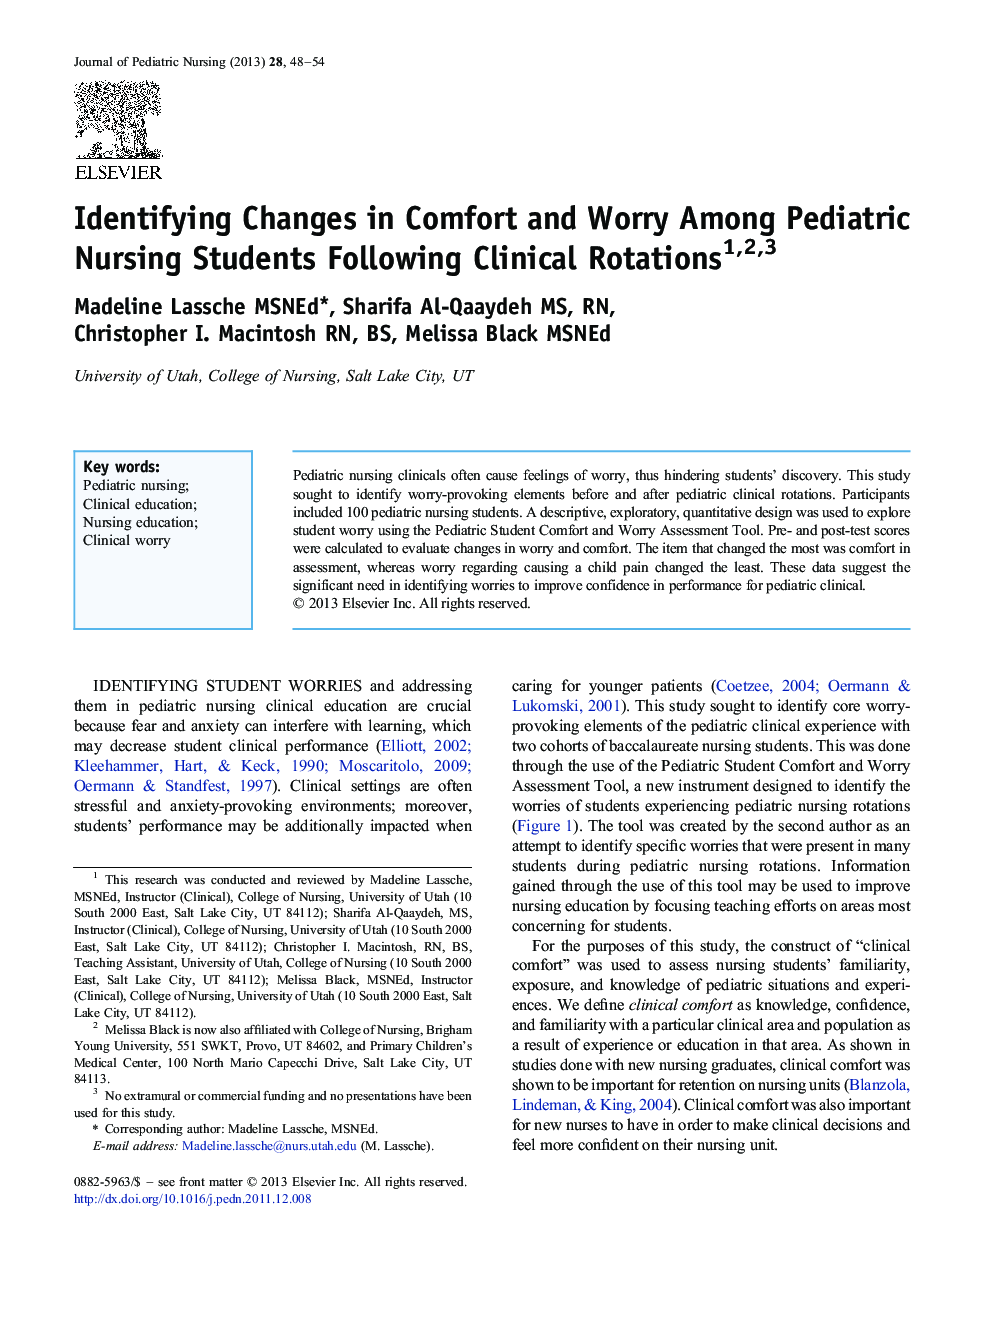 Identifying Changes in Comfort and Worry Among Pediatric Nursing Students Following Clinical Rotations 123